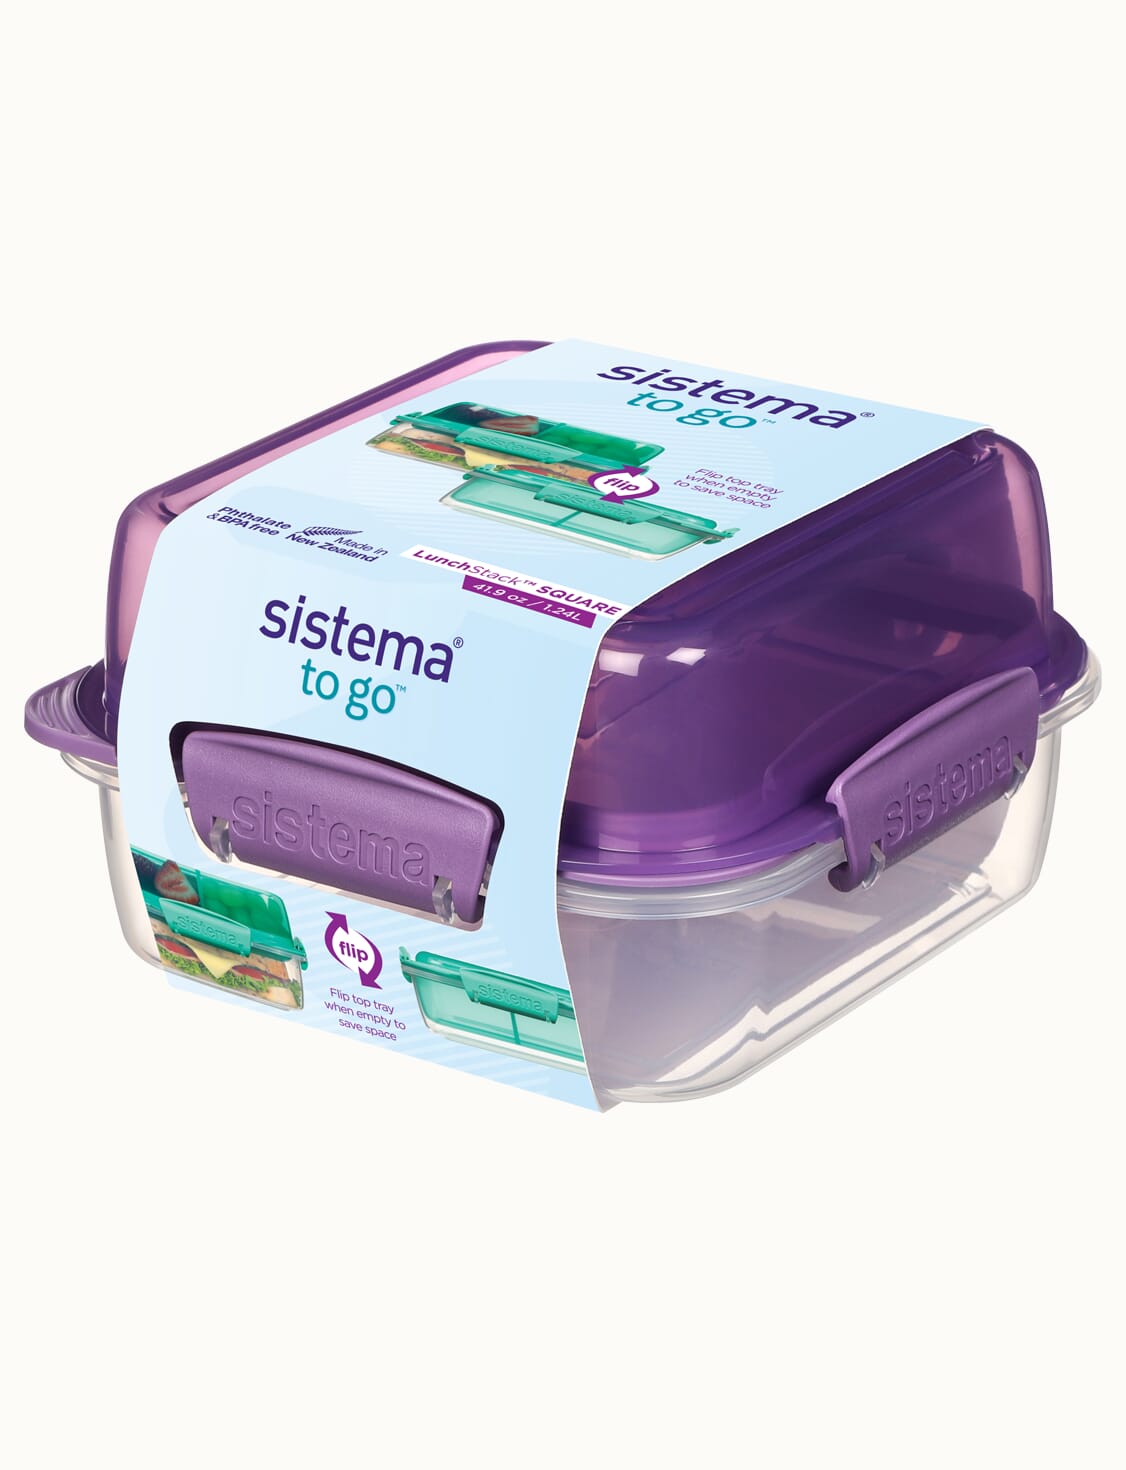 https://stergita.sirv.com/sistema/catalog/product/2/1/21610_lunchstacksquare_togo_angle_label_english_mistypurple.png?canvas.color=fcfbf8